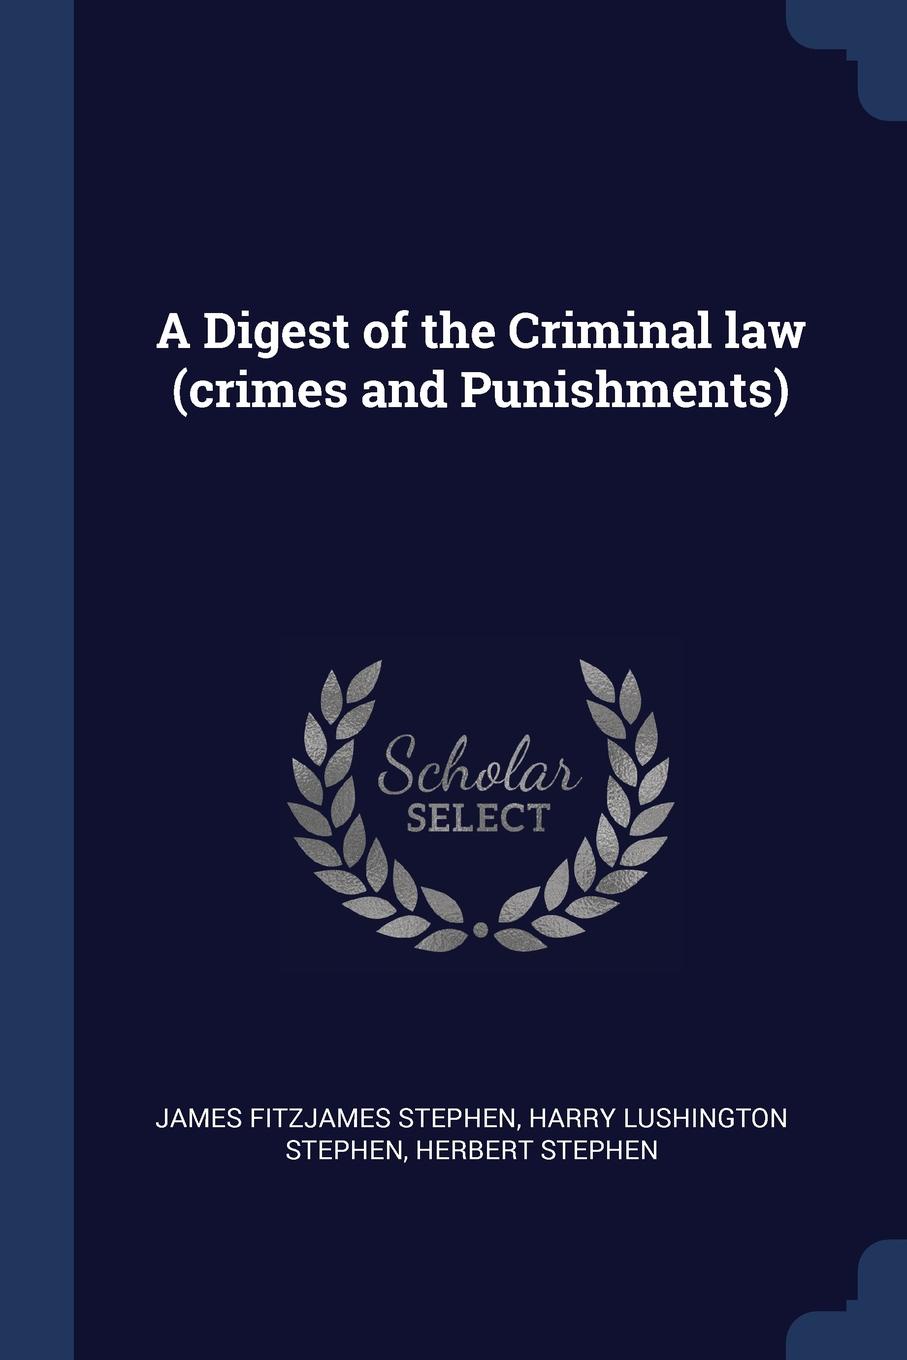 A Digest of the Criminal law (crimes and Punishments)